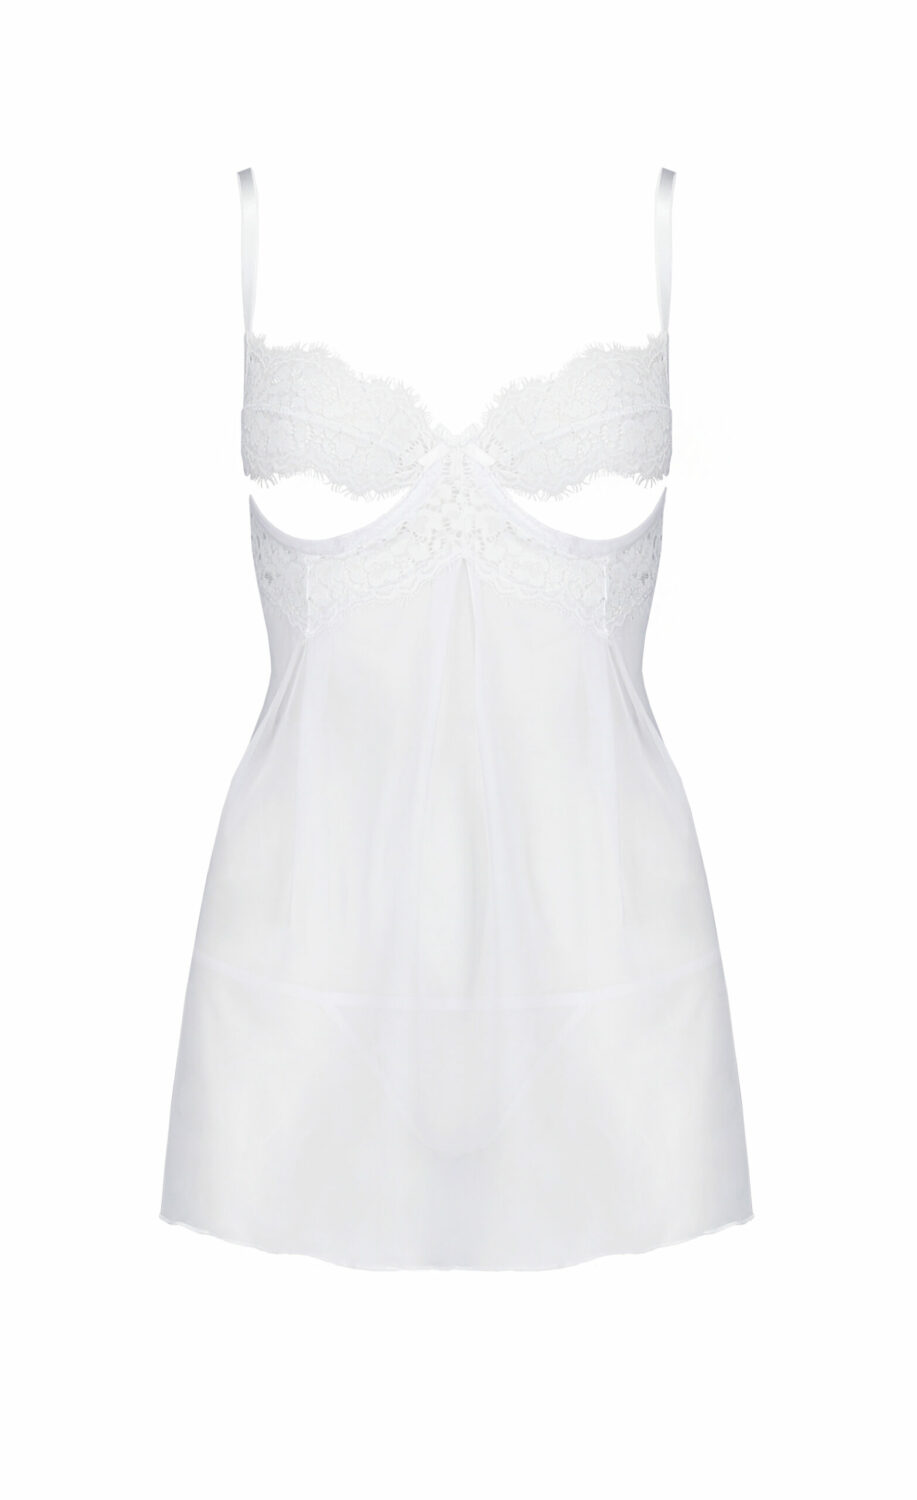 Silentia Avanua, white lace chemise with thong for women | The Nylon Bar